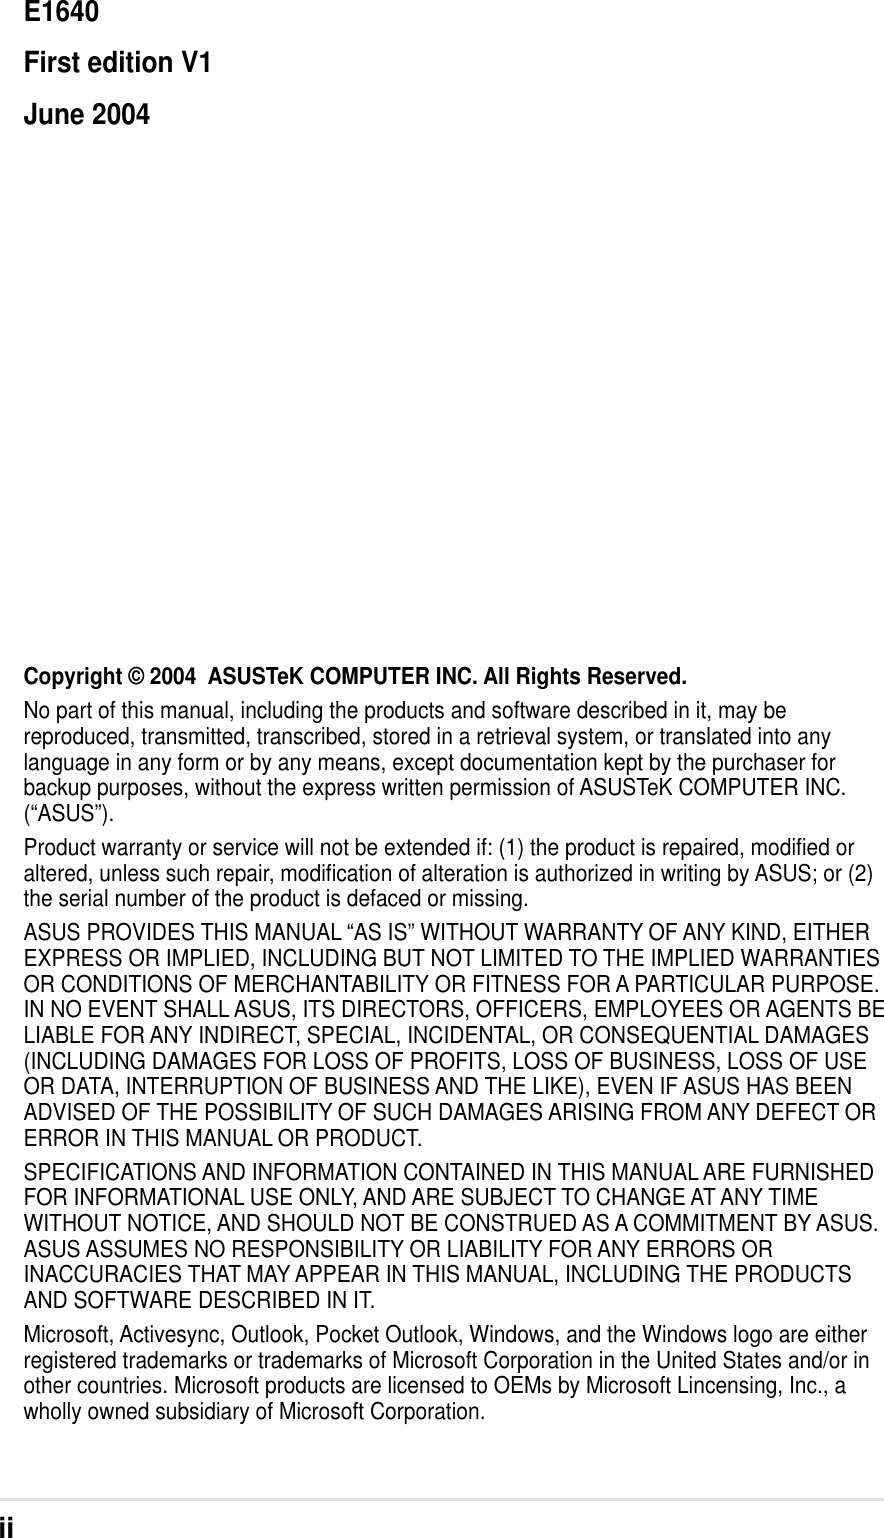 iiCopyright © 2004  ASUSTeK COMPUTER INC. All Rights Reserved.No part of this manual, including the products and software described in it, may bereproduced, transmitted, transcribed, stored in a retrieval system, or translated into anylanguage in any form or by any means, except documentation kept by the purchaser forbackup purposes, without the express written permission of ASUSTeK COMPUTER INC.(“ASUS”).Product warranty or service will not be extended if: (1) the product is repaired, modified oraltered, unless such repair, modification of alteration is authorized in writing by ASUS; or (2)the serial number of the product is defaced or missing.ASUS PROVIDES THIS MANUAL “AS IS” WITHOUT WARRANTY OF ANY KIND, EITHEREXPRESS OR IMPLIED, INCLUDING BUT NOT LIMITED TO THE IMPLIED WARRANTIESOR CONDITIONS OF MERCHANTABILITY OR FITNESS FOR A PARTICULAR PURPOSE.IN NO EVENT SHALL ASUS, ITS DIRECTORS, OFFICERS, EMPLOYEES OR AGENTS BELIABLE FOR ANY INDIRECT, SPECIAL, INCIDENTAL, OR CONSEQUENTIAL DAMAGES(INCLUDING DAMAGES FOR LOSS OF PROFITS, LOSS OF BUSINESS, LOSS OF USEOR DATA, INTERRUPTION OF BUSINESS AND THE LIKE), EVEN IF ASUS HAS BEENADVISED OF THE POSSIBILITY OF SUCH DAMAGES ARISING FROM ANY DEFECT ORERROR IN THIS MANUAL OR PRODUCT.SPECIFICATIONS AND INFORMATION CONTAINED IN THIS MANUAL ARE FURNISHEDFOR INFORMATIONAL USE ONLY, AND ARE SUBJECT TO CHANGE AT ANY TIMEWITHOUT NOTICE, AND SHOULD NOT BE CONSTRUED AS A COMMITMENT BY ASUS.ASUS ASSUMES NO RESPONSIBILITY OR LIABILITY FOR ANY ERRORS ORINACCURACIES THAT MAY APPEAR IN THIS MANUAL, INCLUDING THE PRODUCTSAND SOFTWARE DESCRIBED IN IT.Microsoft, Activesync, Outlook, Pocket Outlook, Windows, and the Windows logo are eitherregistered trademarks or trademarks of Microsoft Corporation in the United States and/or inother countries. Microsoft products are licensed to OEMs by Microsoft Lincensing, Inc., awholly owned subsidiary of Microsoft Corporation.E1640First edition V1June 2004